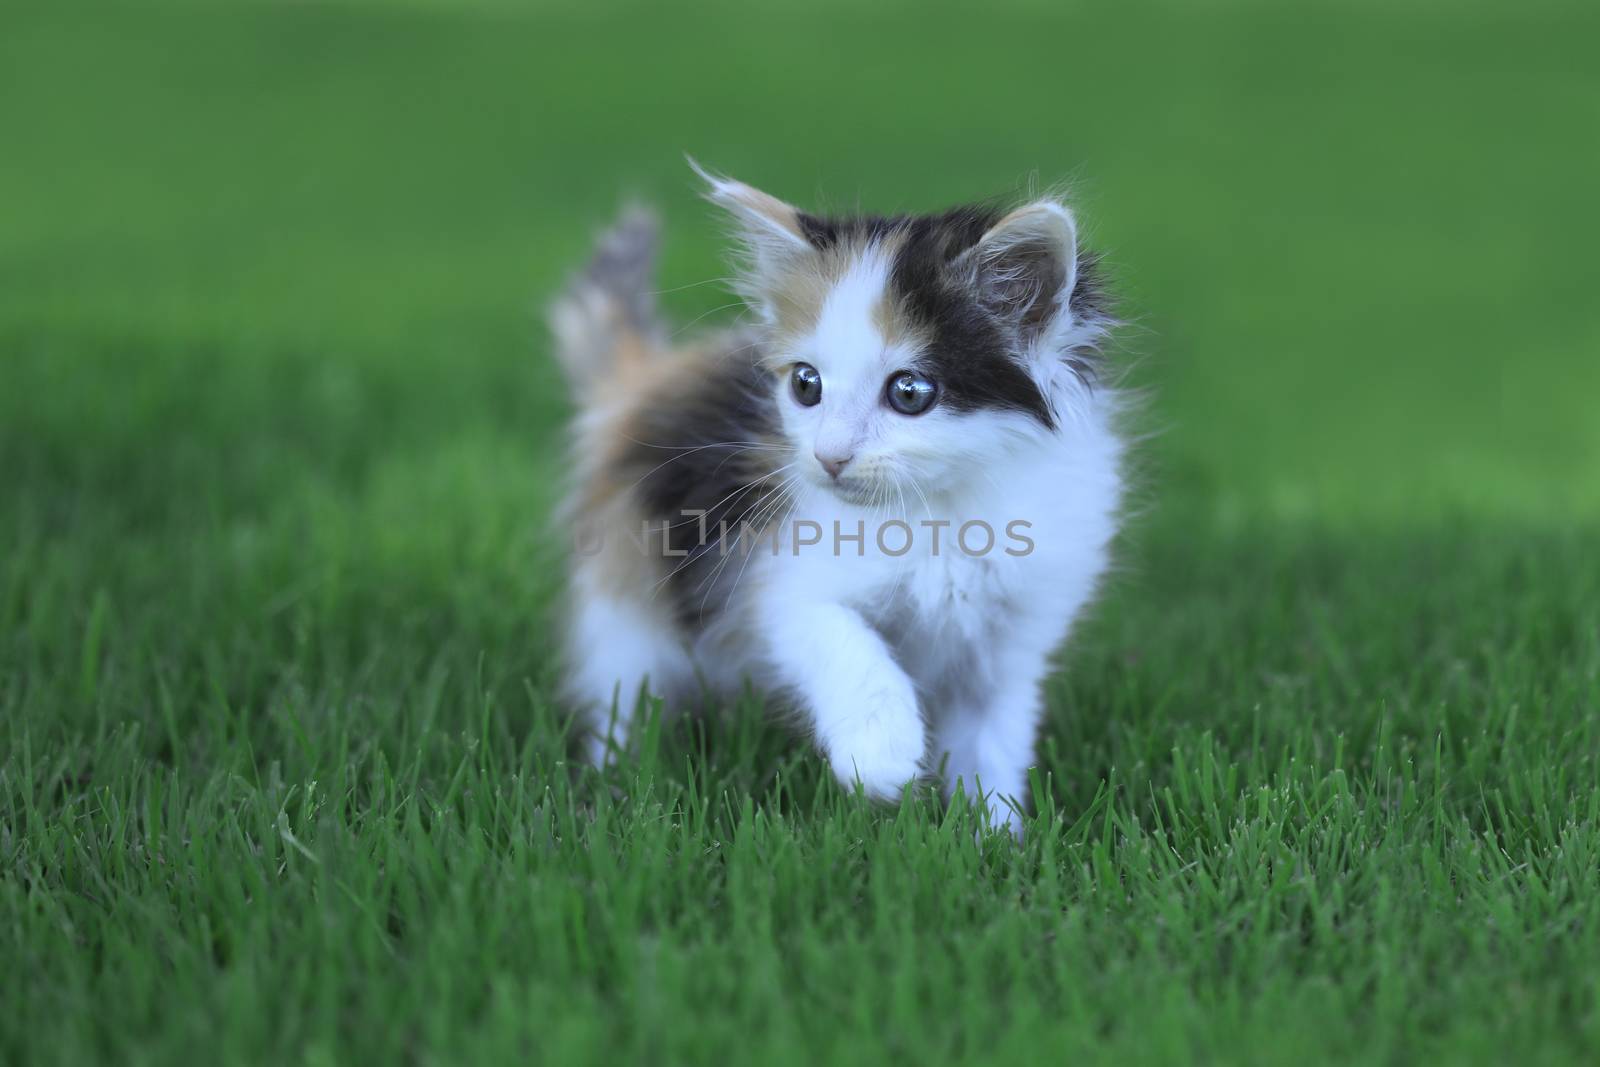 Calico Kitten Outdoor in the Green Grass by tobkatrina